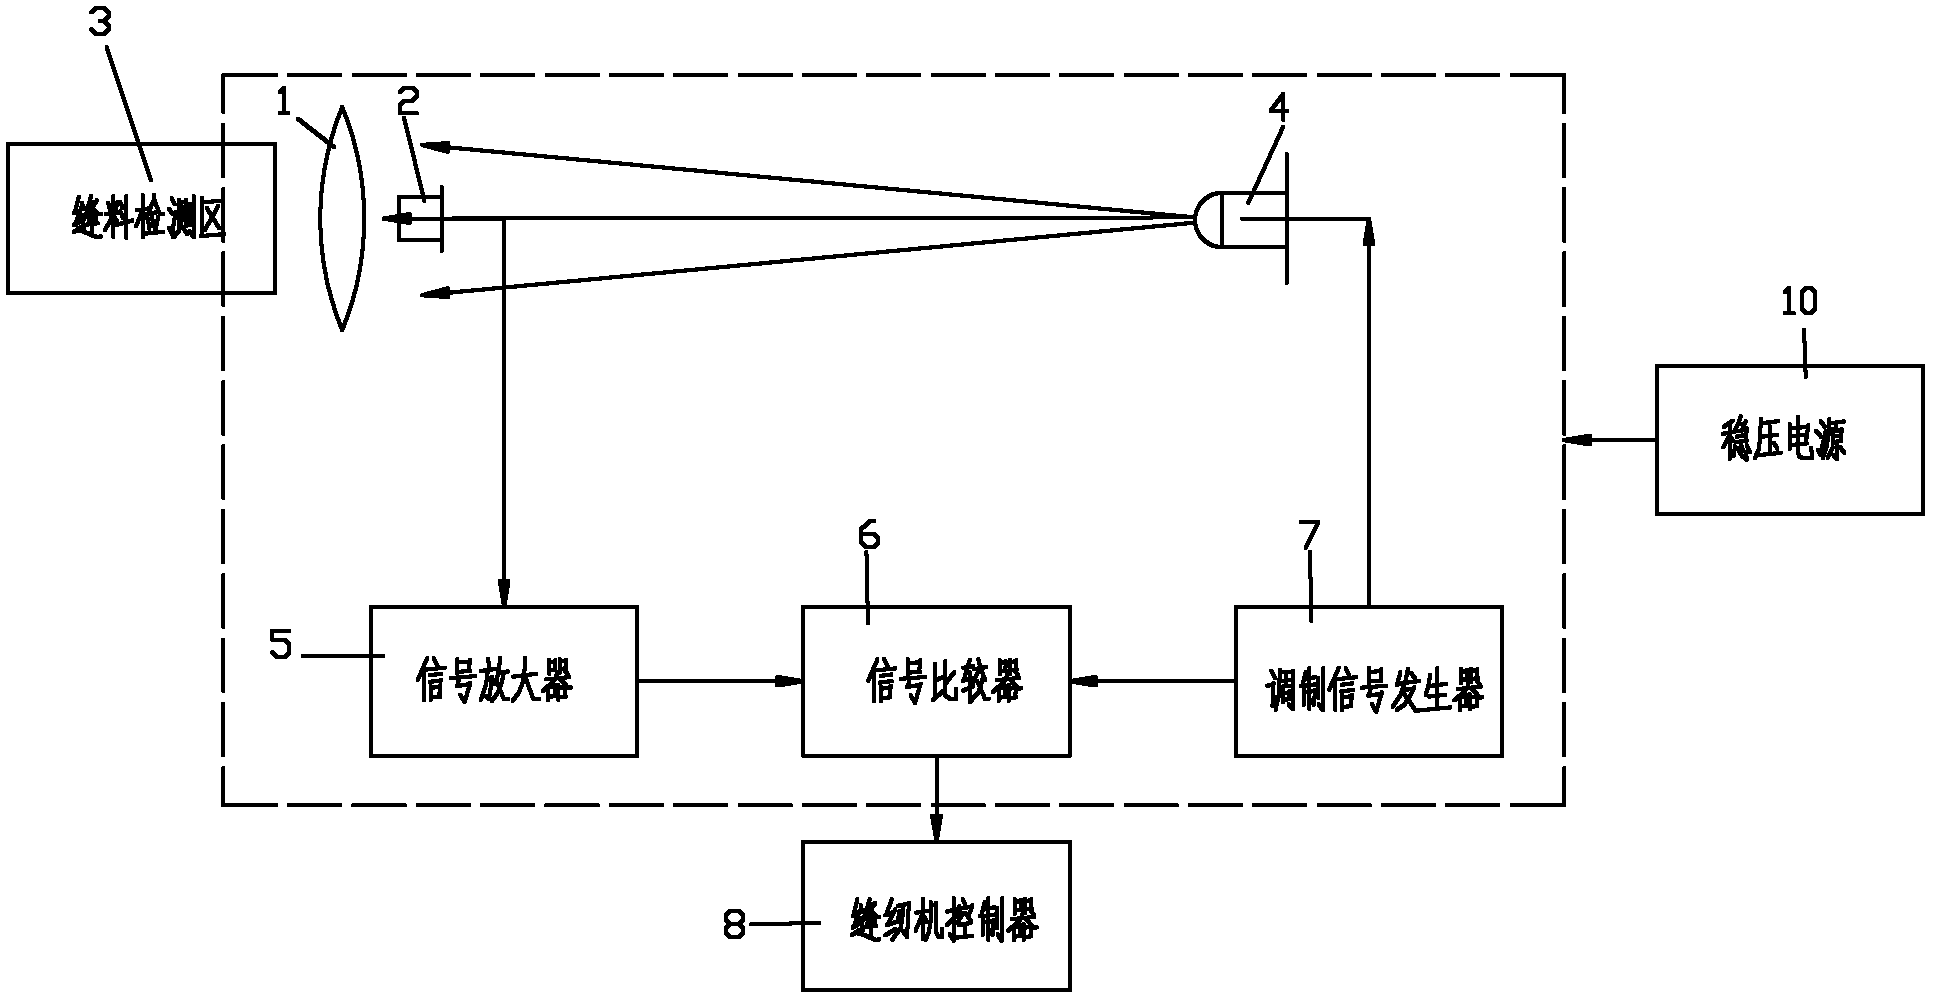 Sewn material detection system of sewing machine